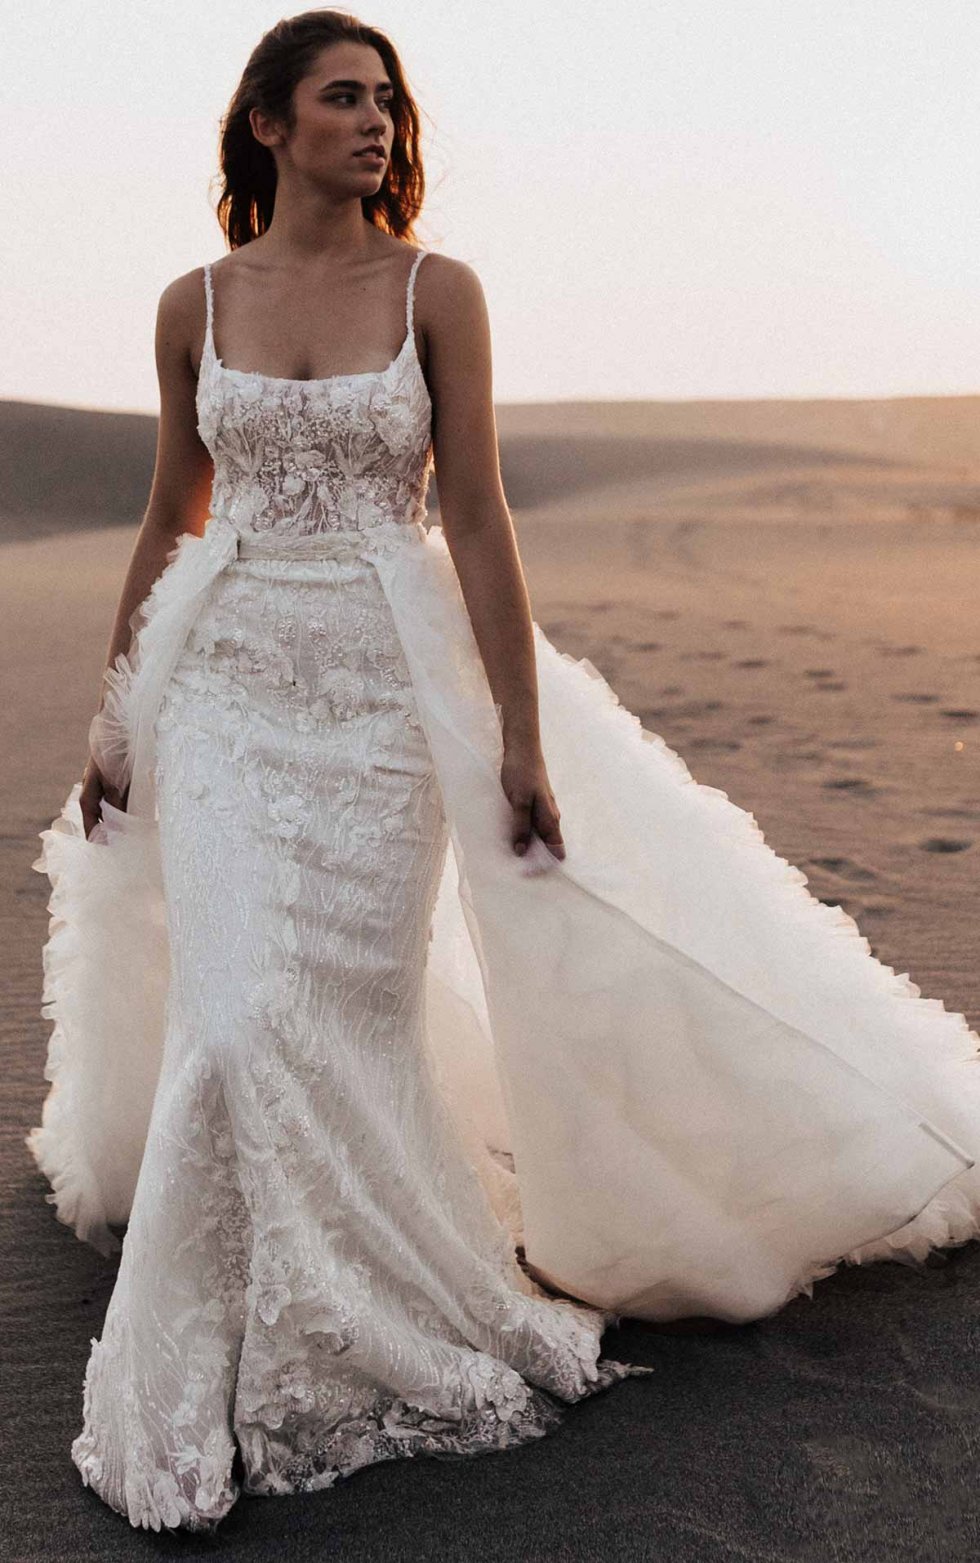 Ivory French Corded Lace Dress | Stunning Lace Bridal Gown – Emily Riggs